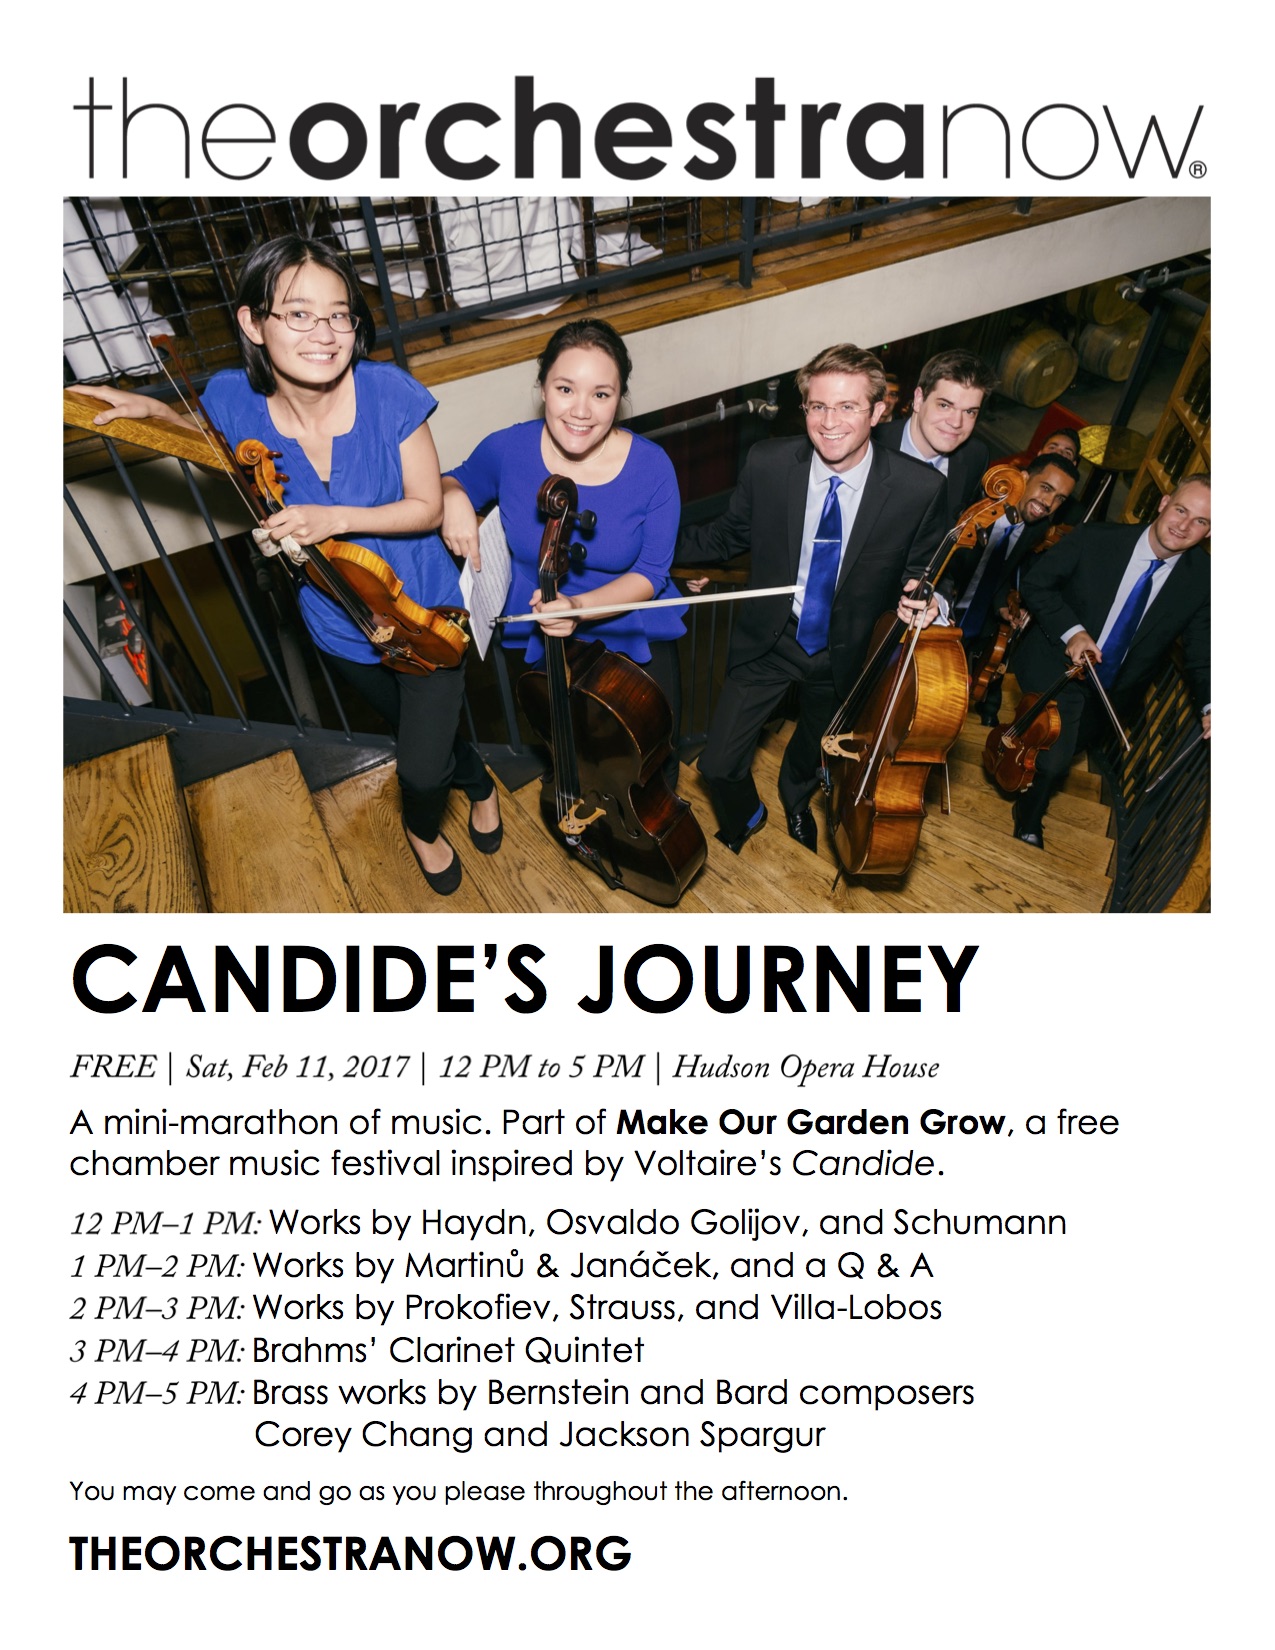 Visit http://http://theorchestranow.org/concerts/fisher-center-at-bard-college/candide-chamber-festival/